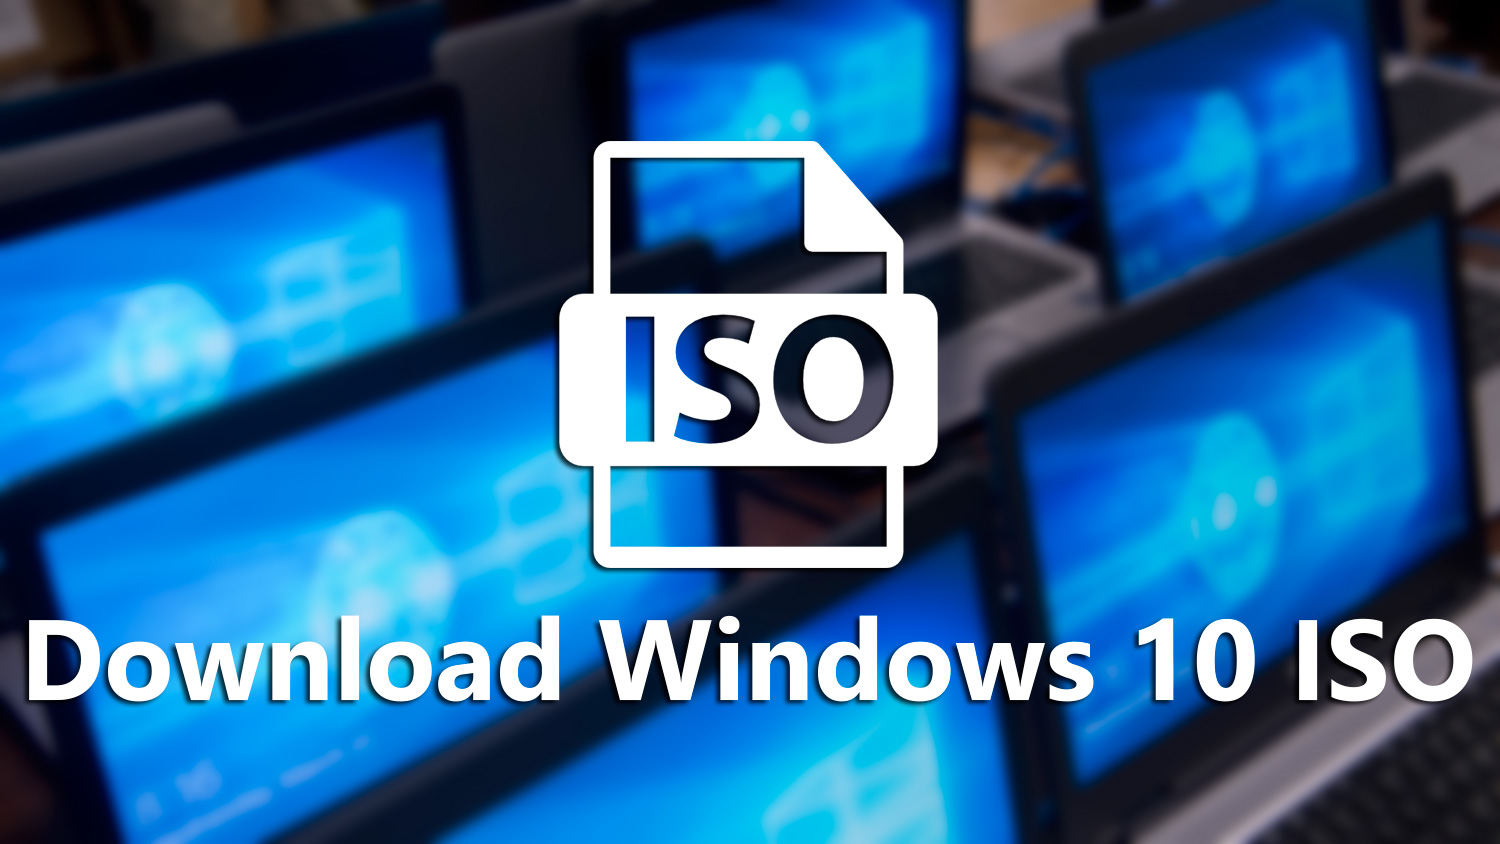 download windows 10 iso without media creation tool. use rufus